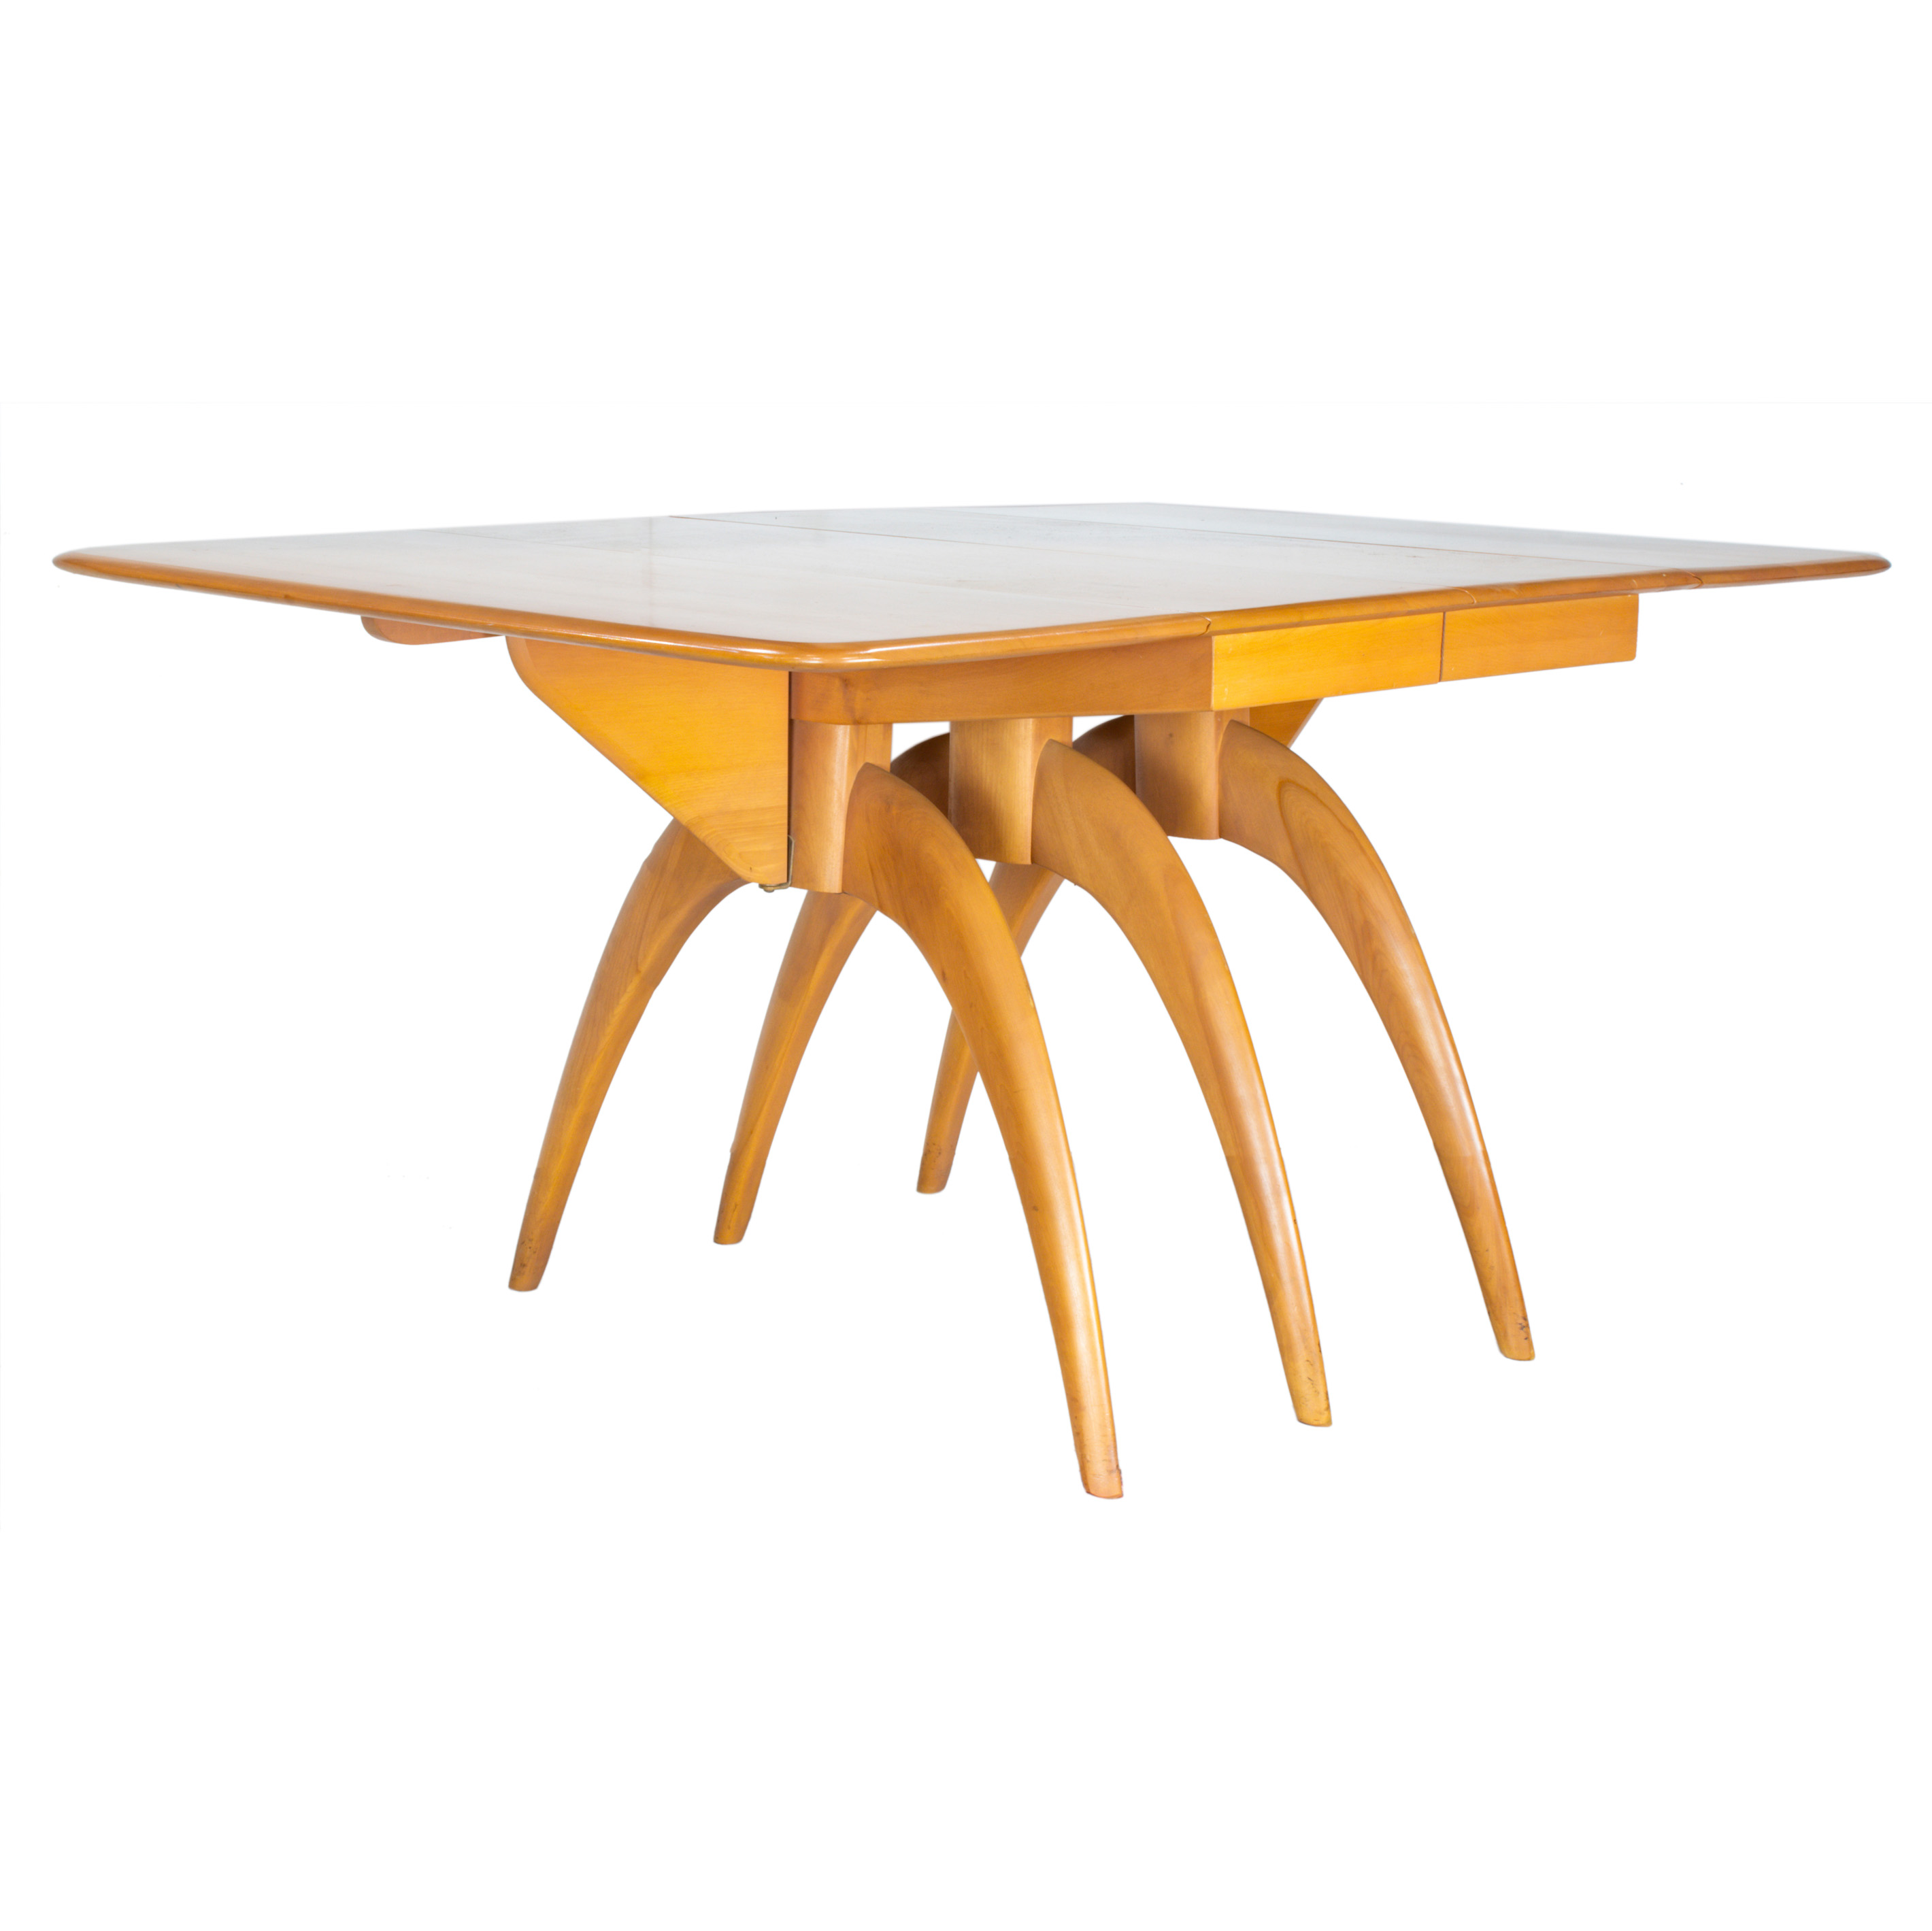 A HEYWOOD WAKEFELD DINING TABLE